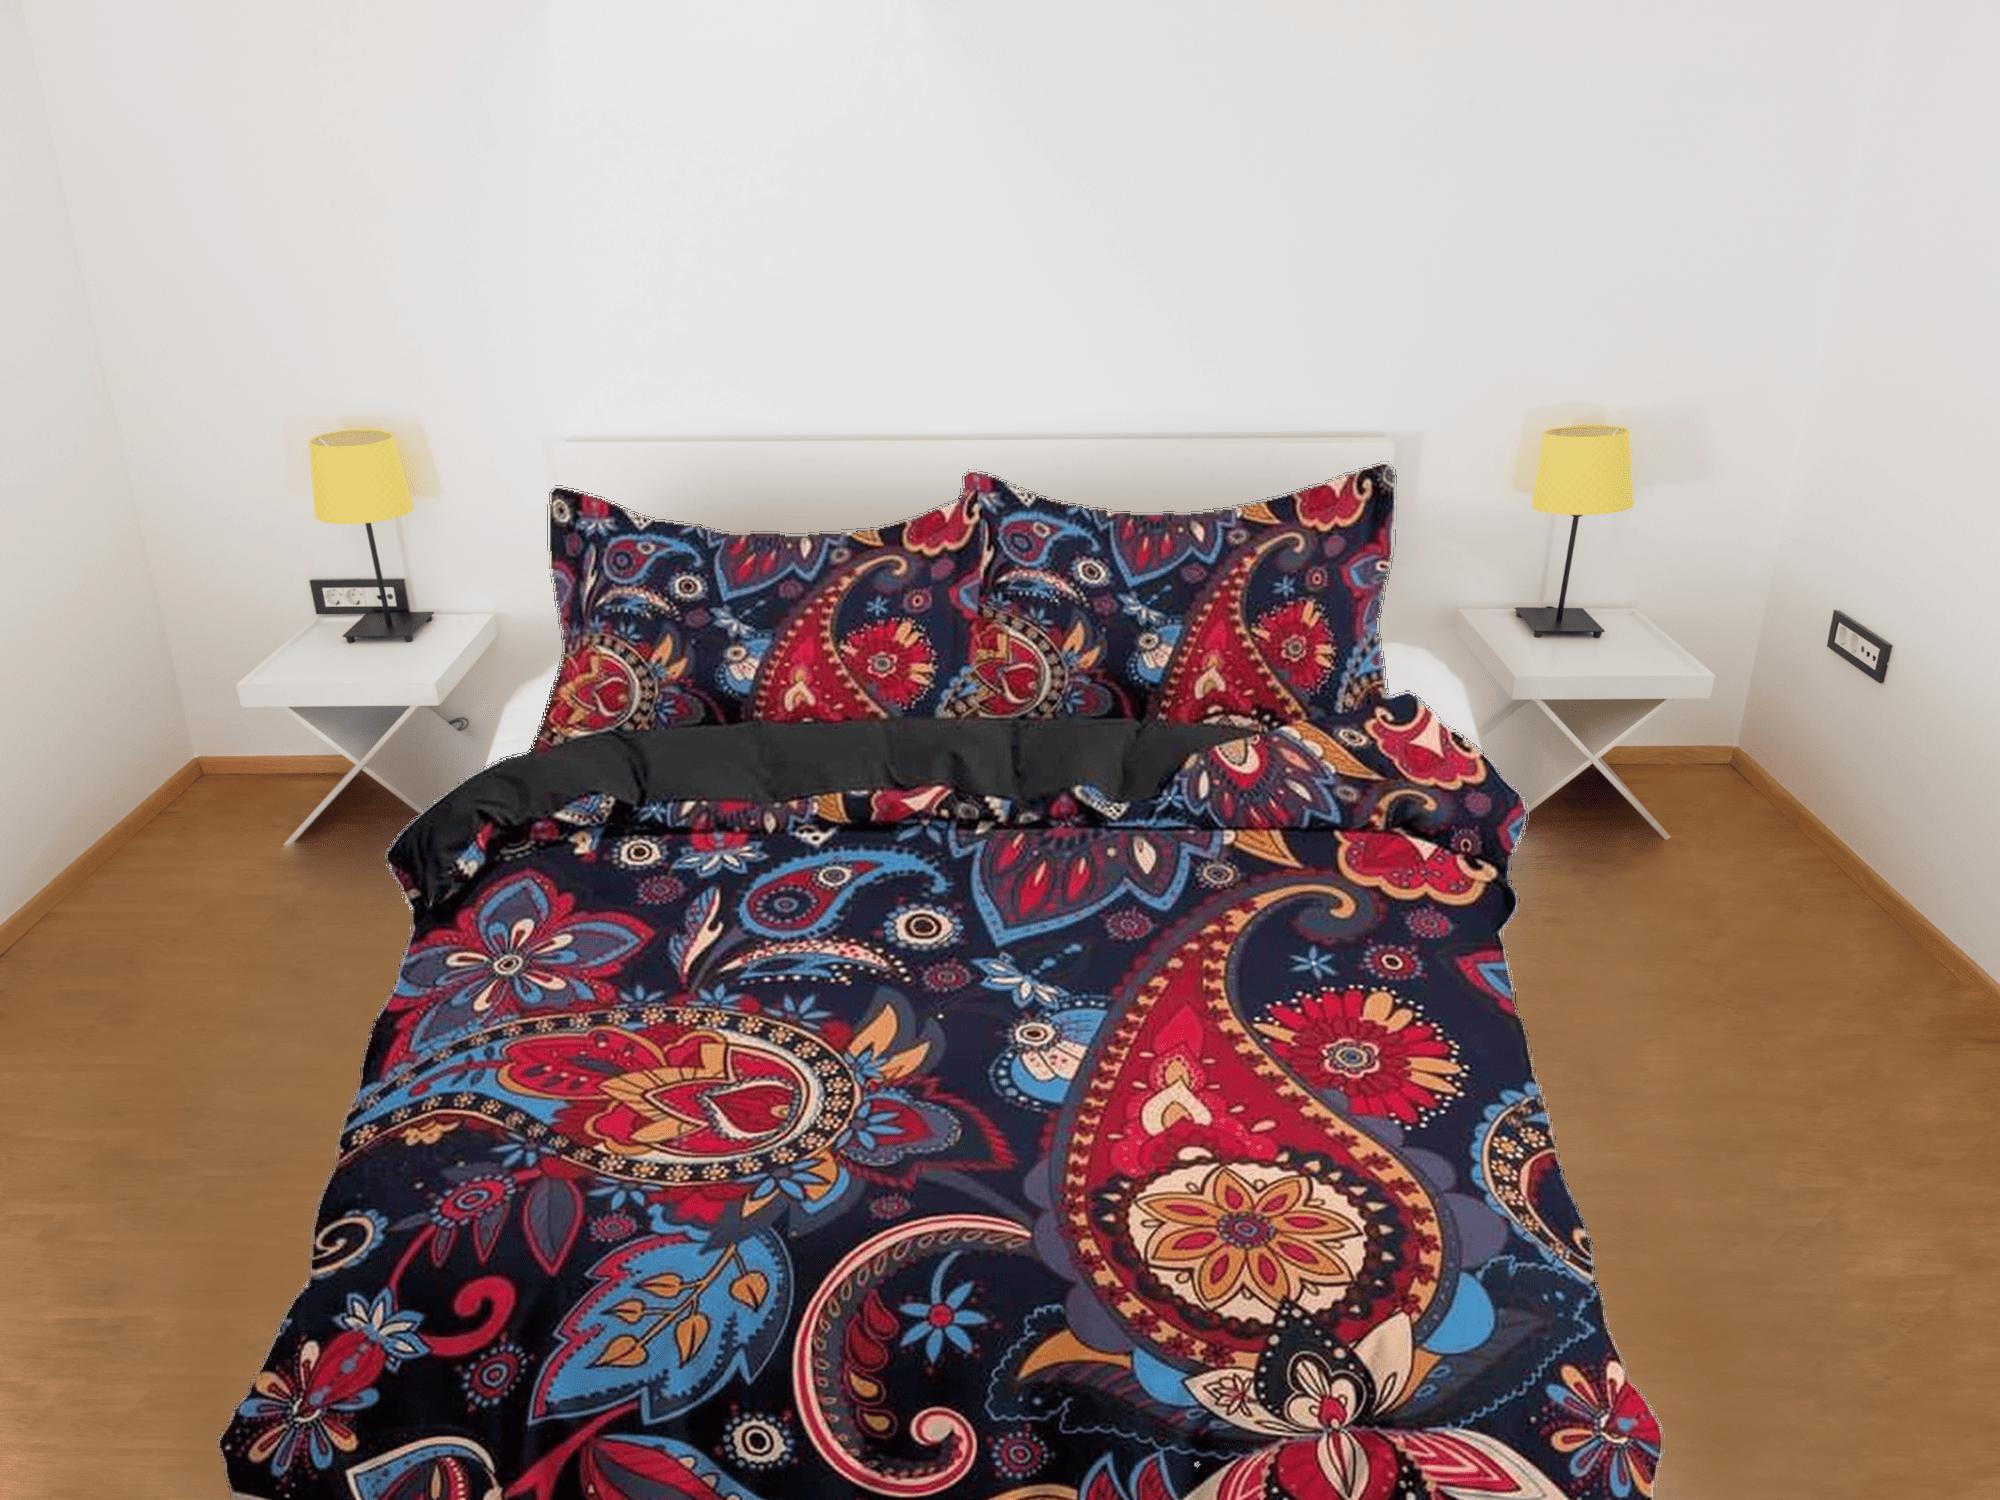 daintyduvet Colorful red paisley dark blue duvet cover set, aesthetic room decor bedding set full, king, queen size, abstract boho bedspread, luxury bed